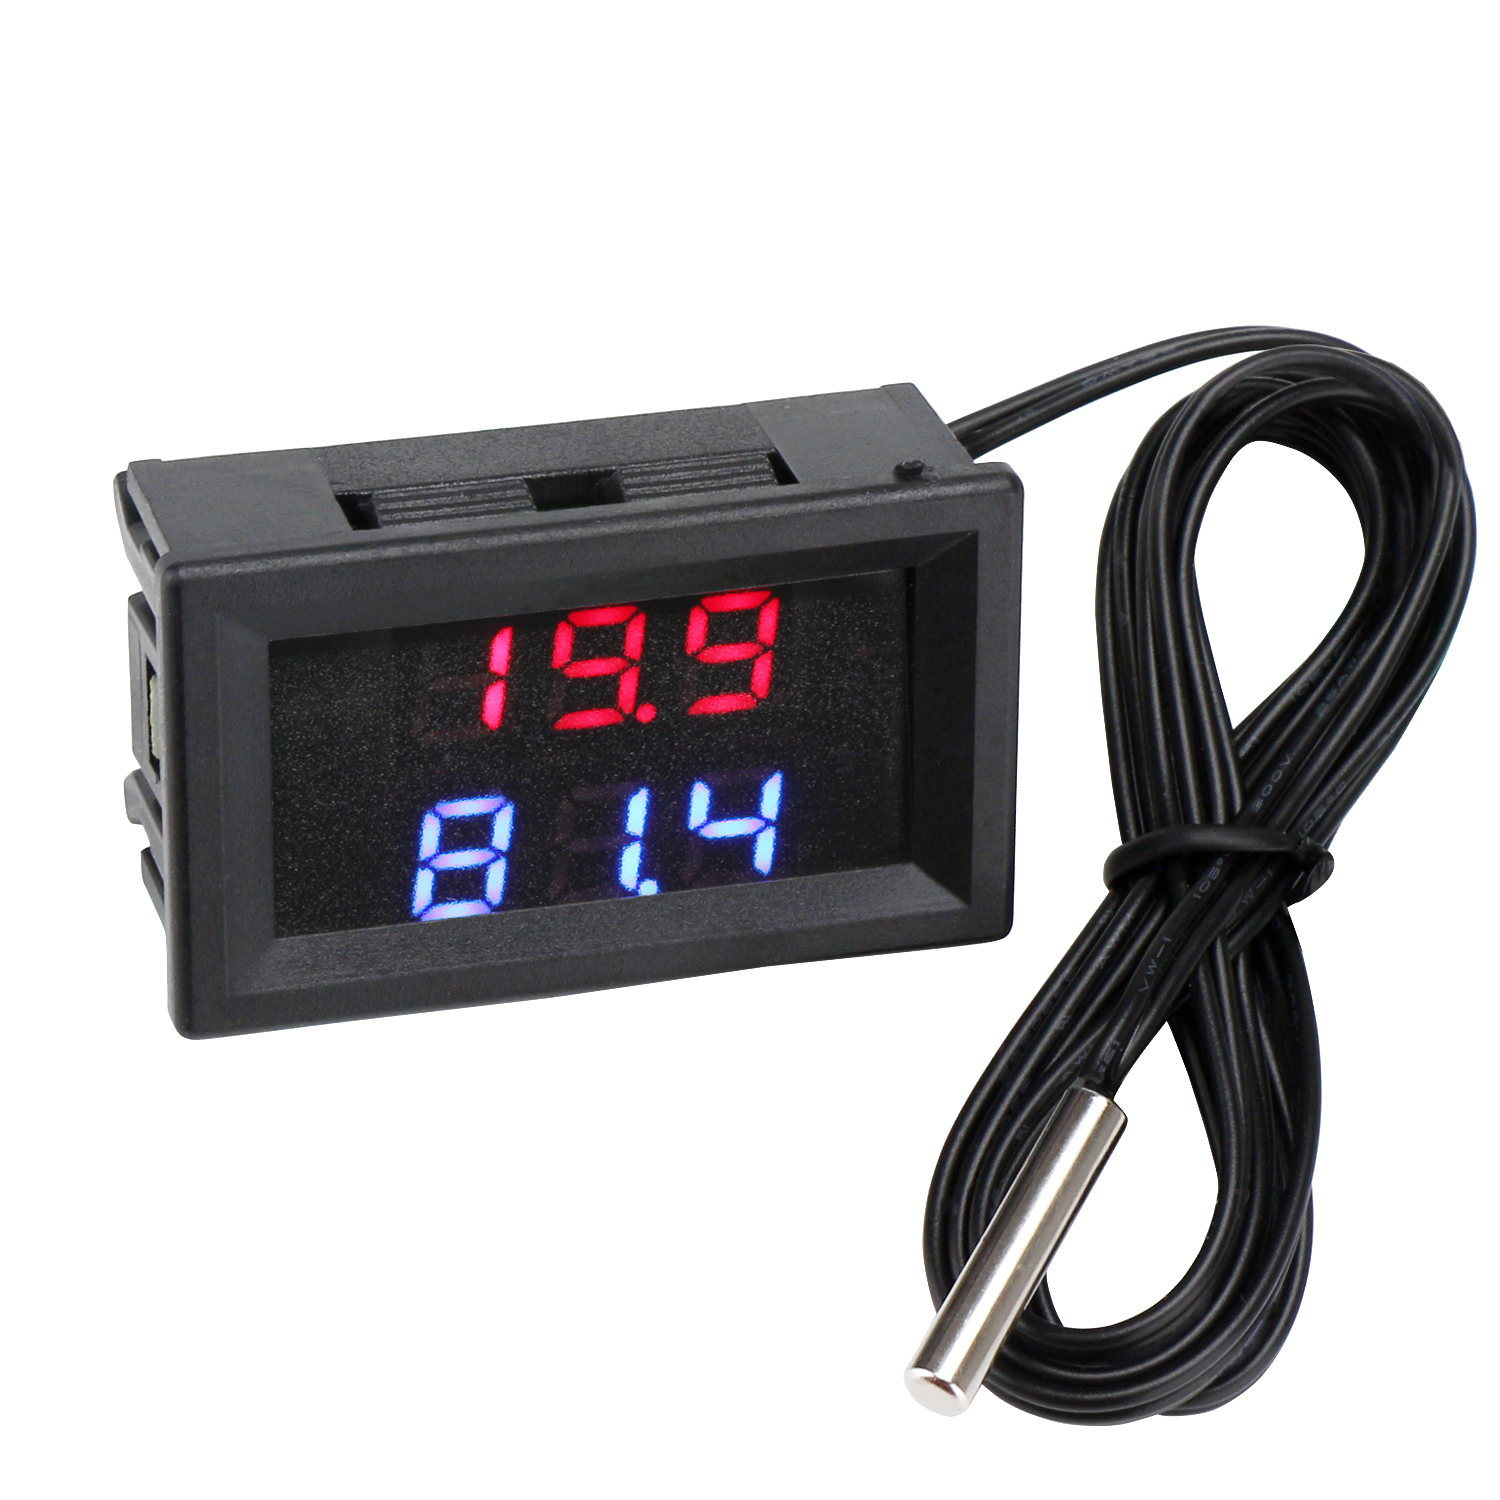 DROK Fahrenheit Scale 0.56 DC 12V Digital Car Clock Thermometer Voltmeter 3in1 Red LED Auto Gauges DS18b20 Probe 